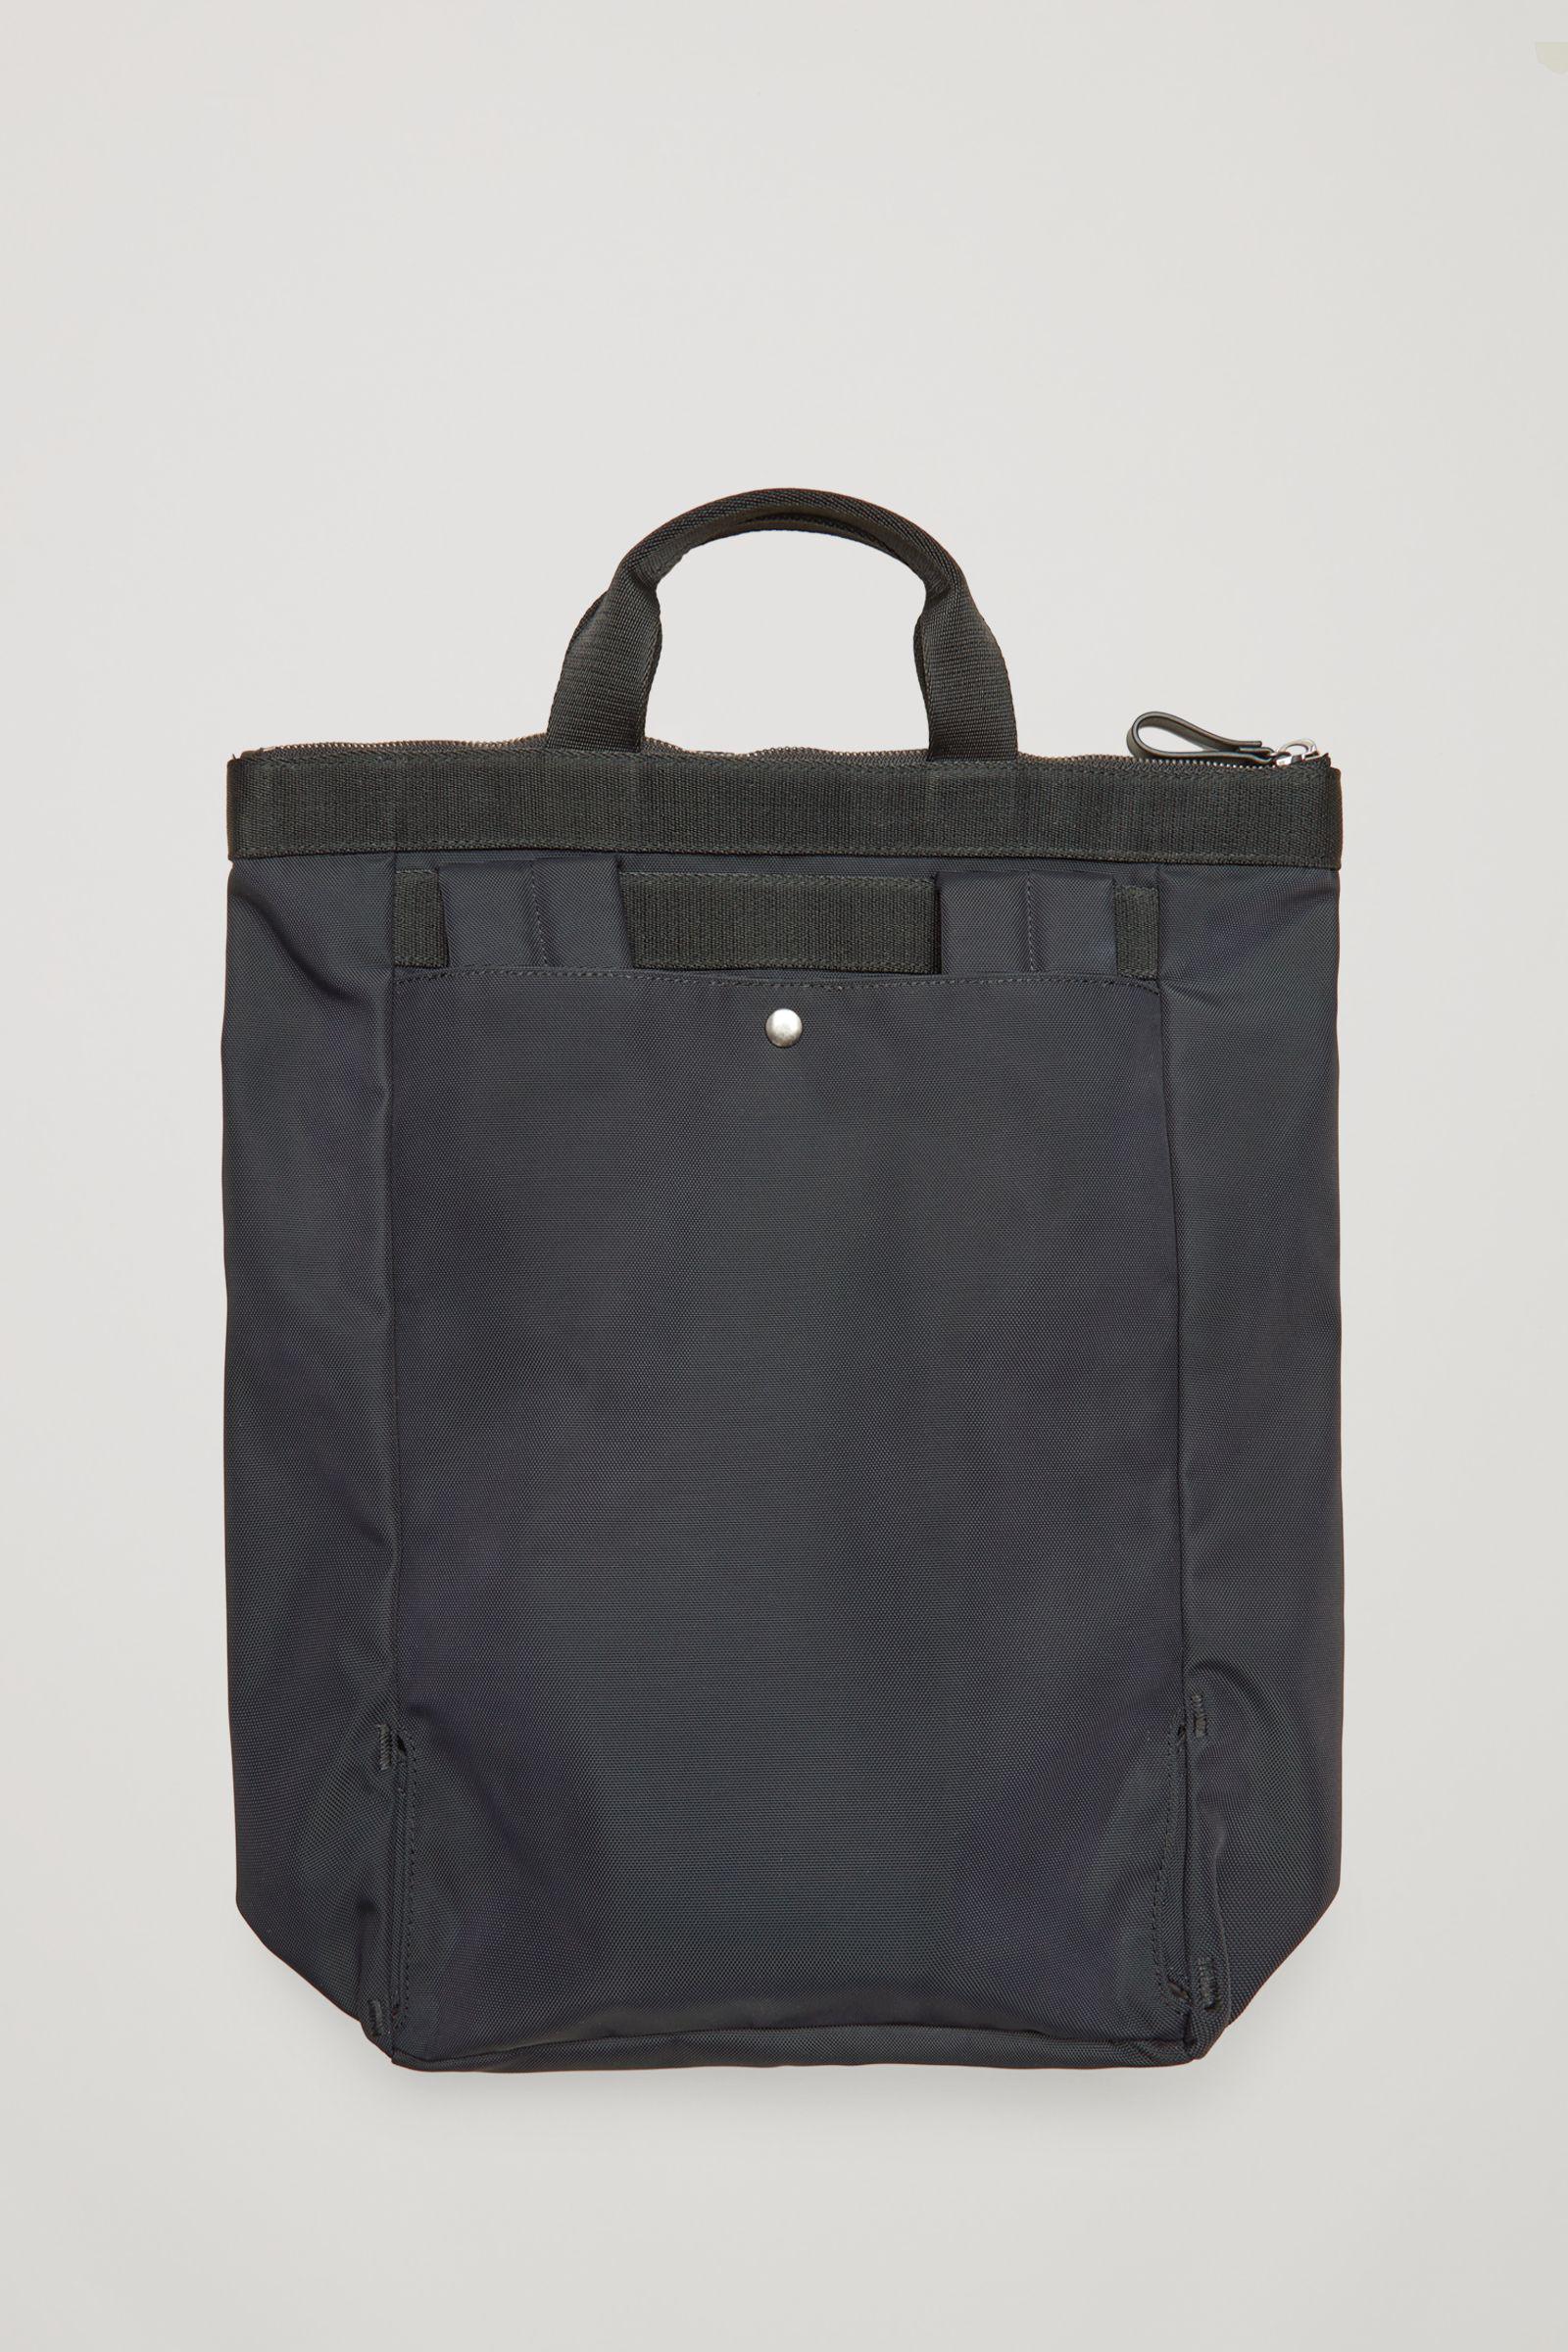 COS Leather Tote Backpack in Dark Navy (Blue) for Men - Lyst